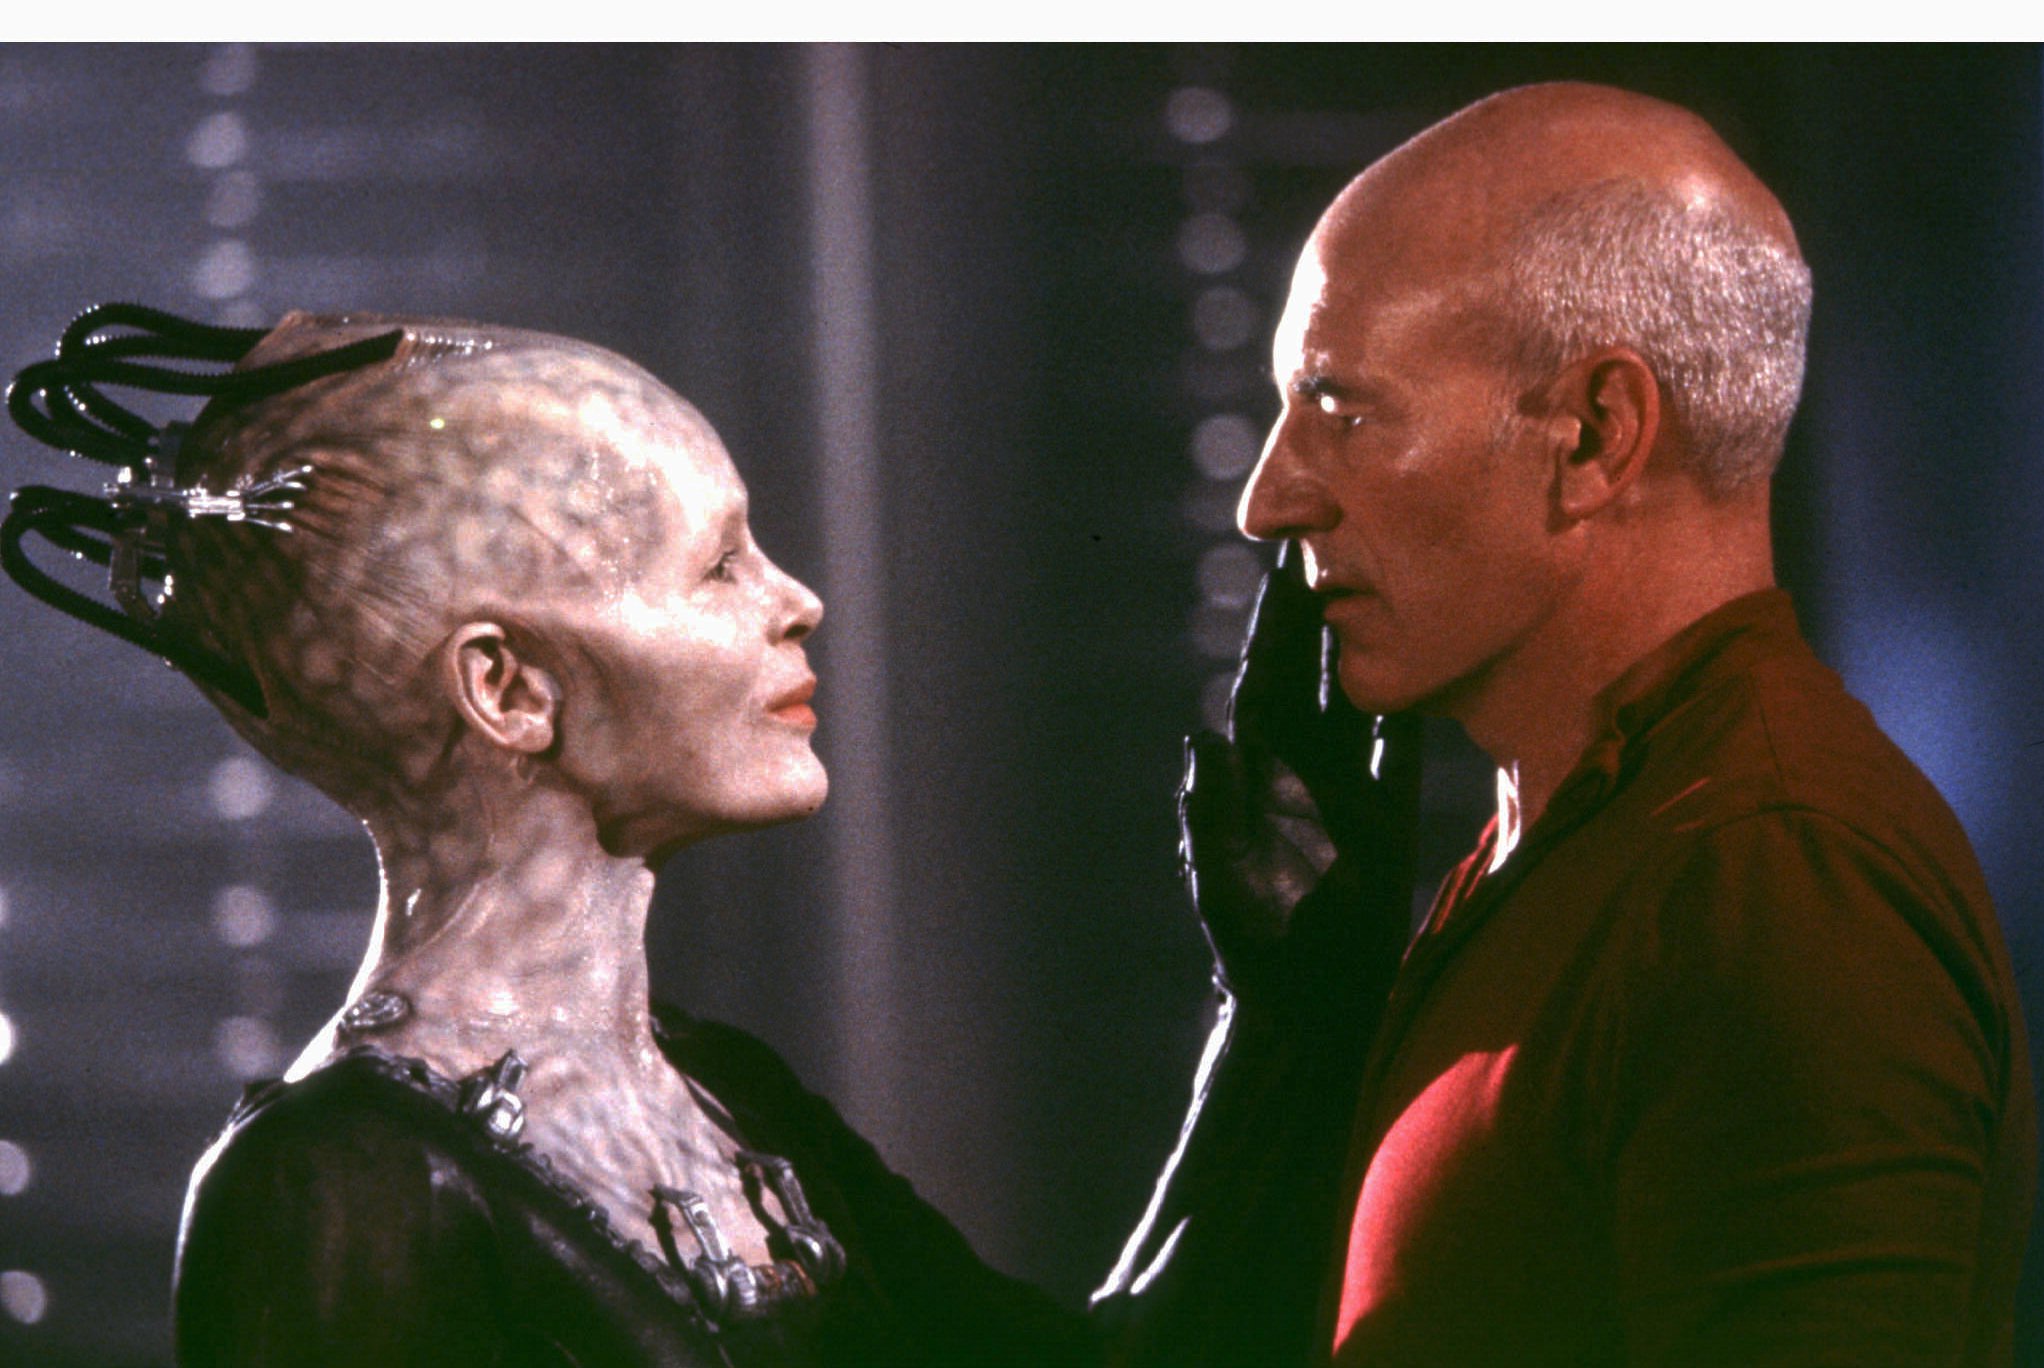 Patrick Stewart as Captain Jean-Luc Picard and Alice Krige as Borg Queen in a scene from Star Trek First Contact. Photo: Reuters